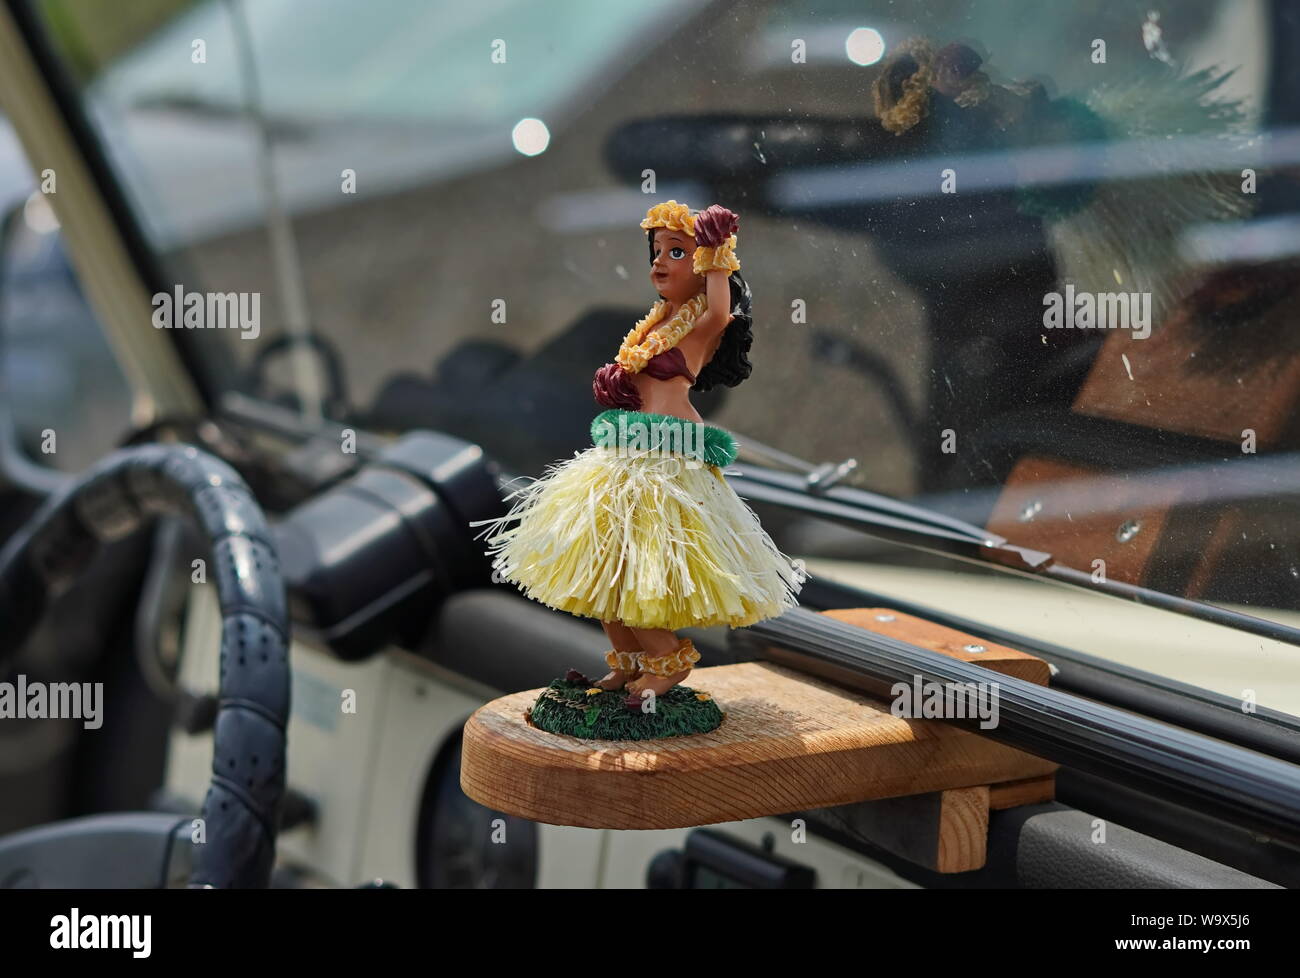 New London, CT / USA - June 22, 2019: Hula dancer ornament in a jeep wrangler with the top down Stock Photo